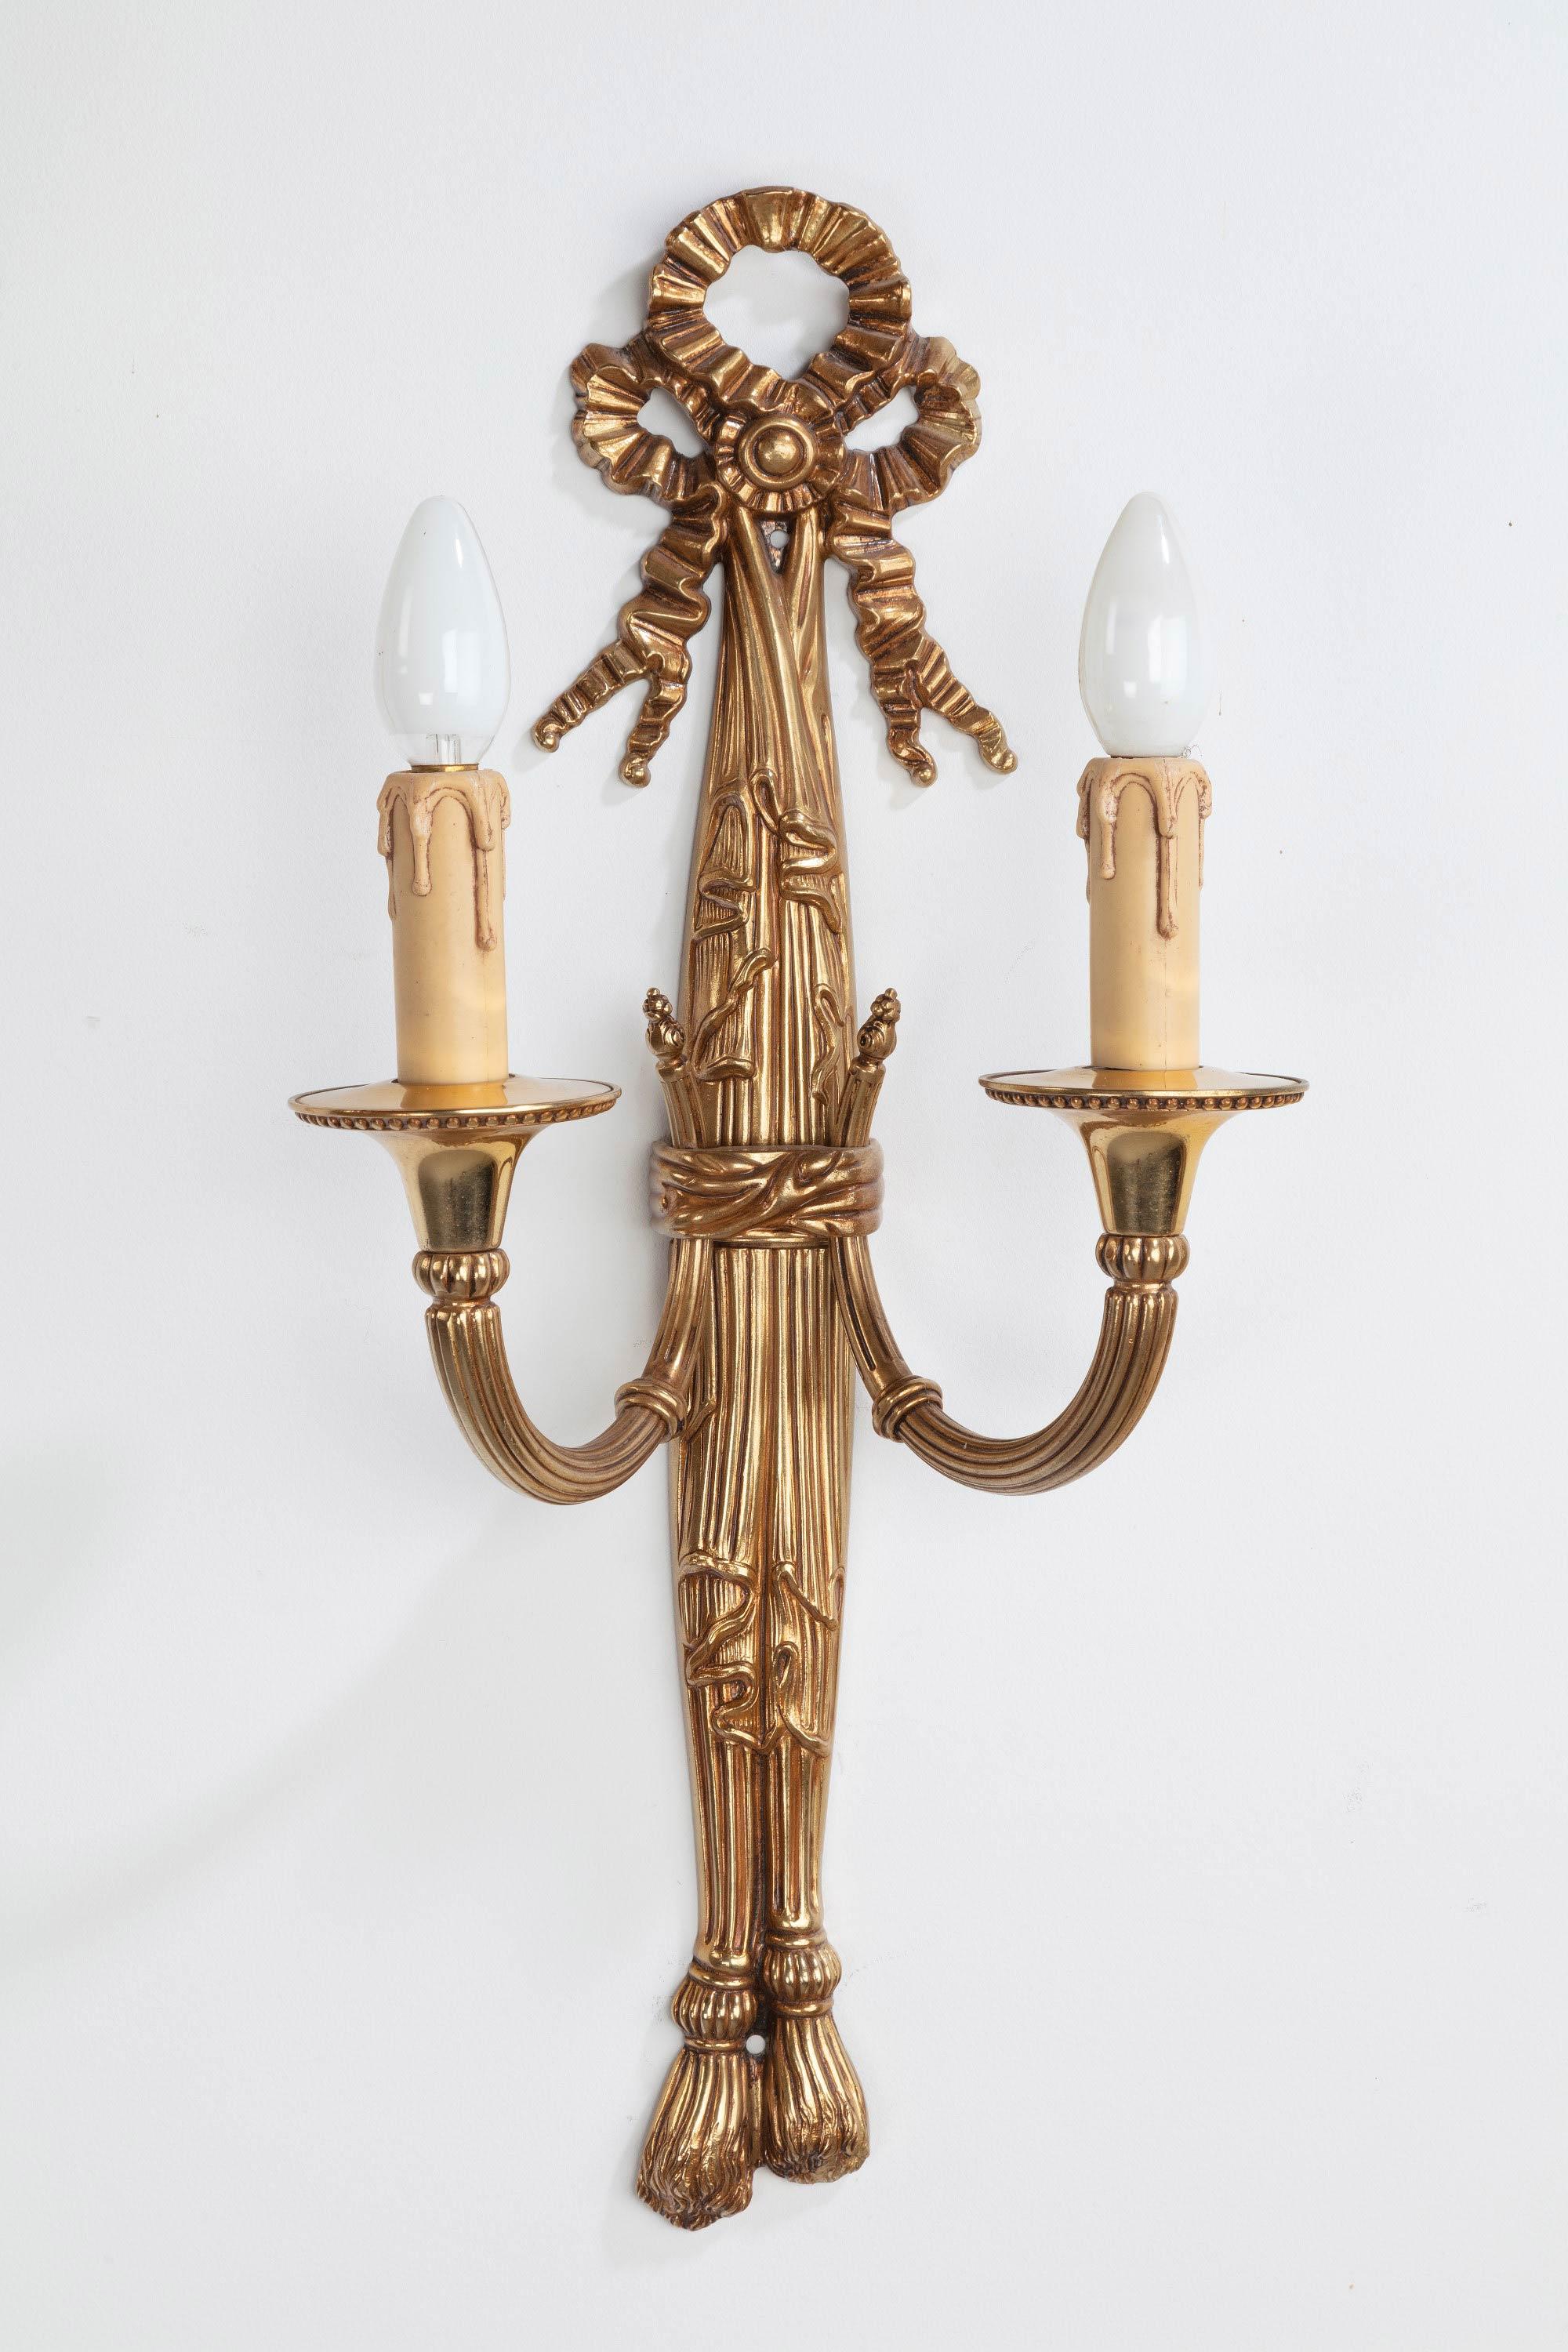 A pair of gilt bronze wall lights in the manner of Robert Adam. The tops with fronds and the overall central stem in the manner of pleated and folded fabric. Very good quality.
 